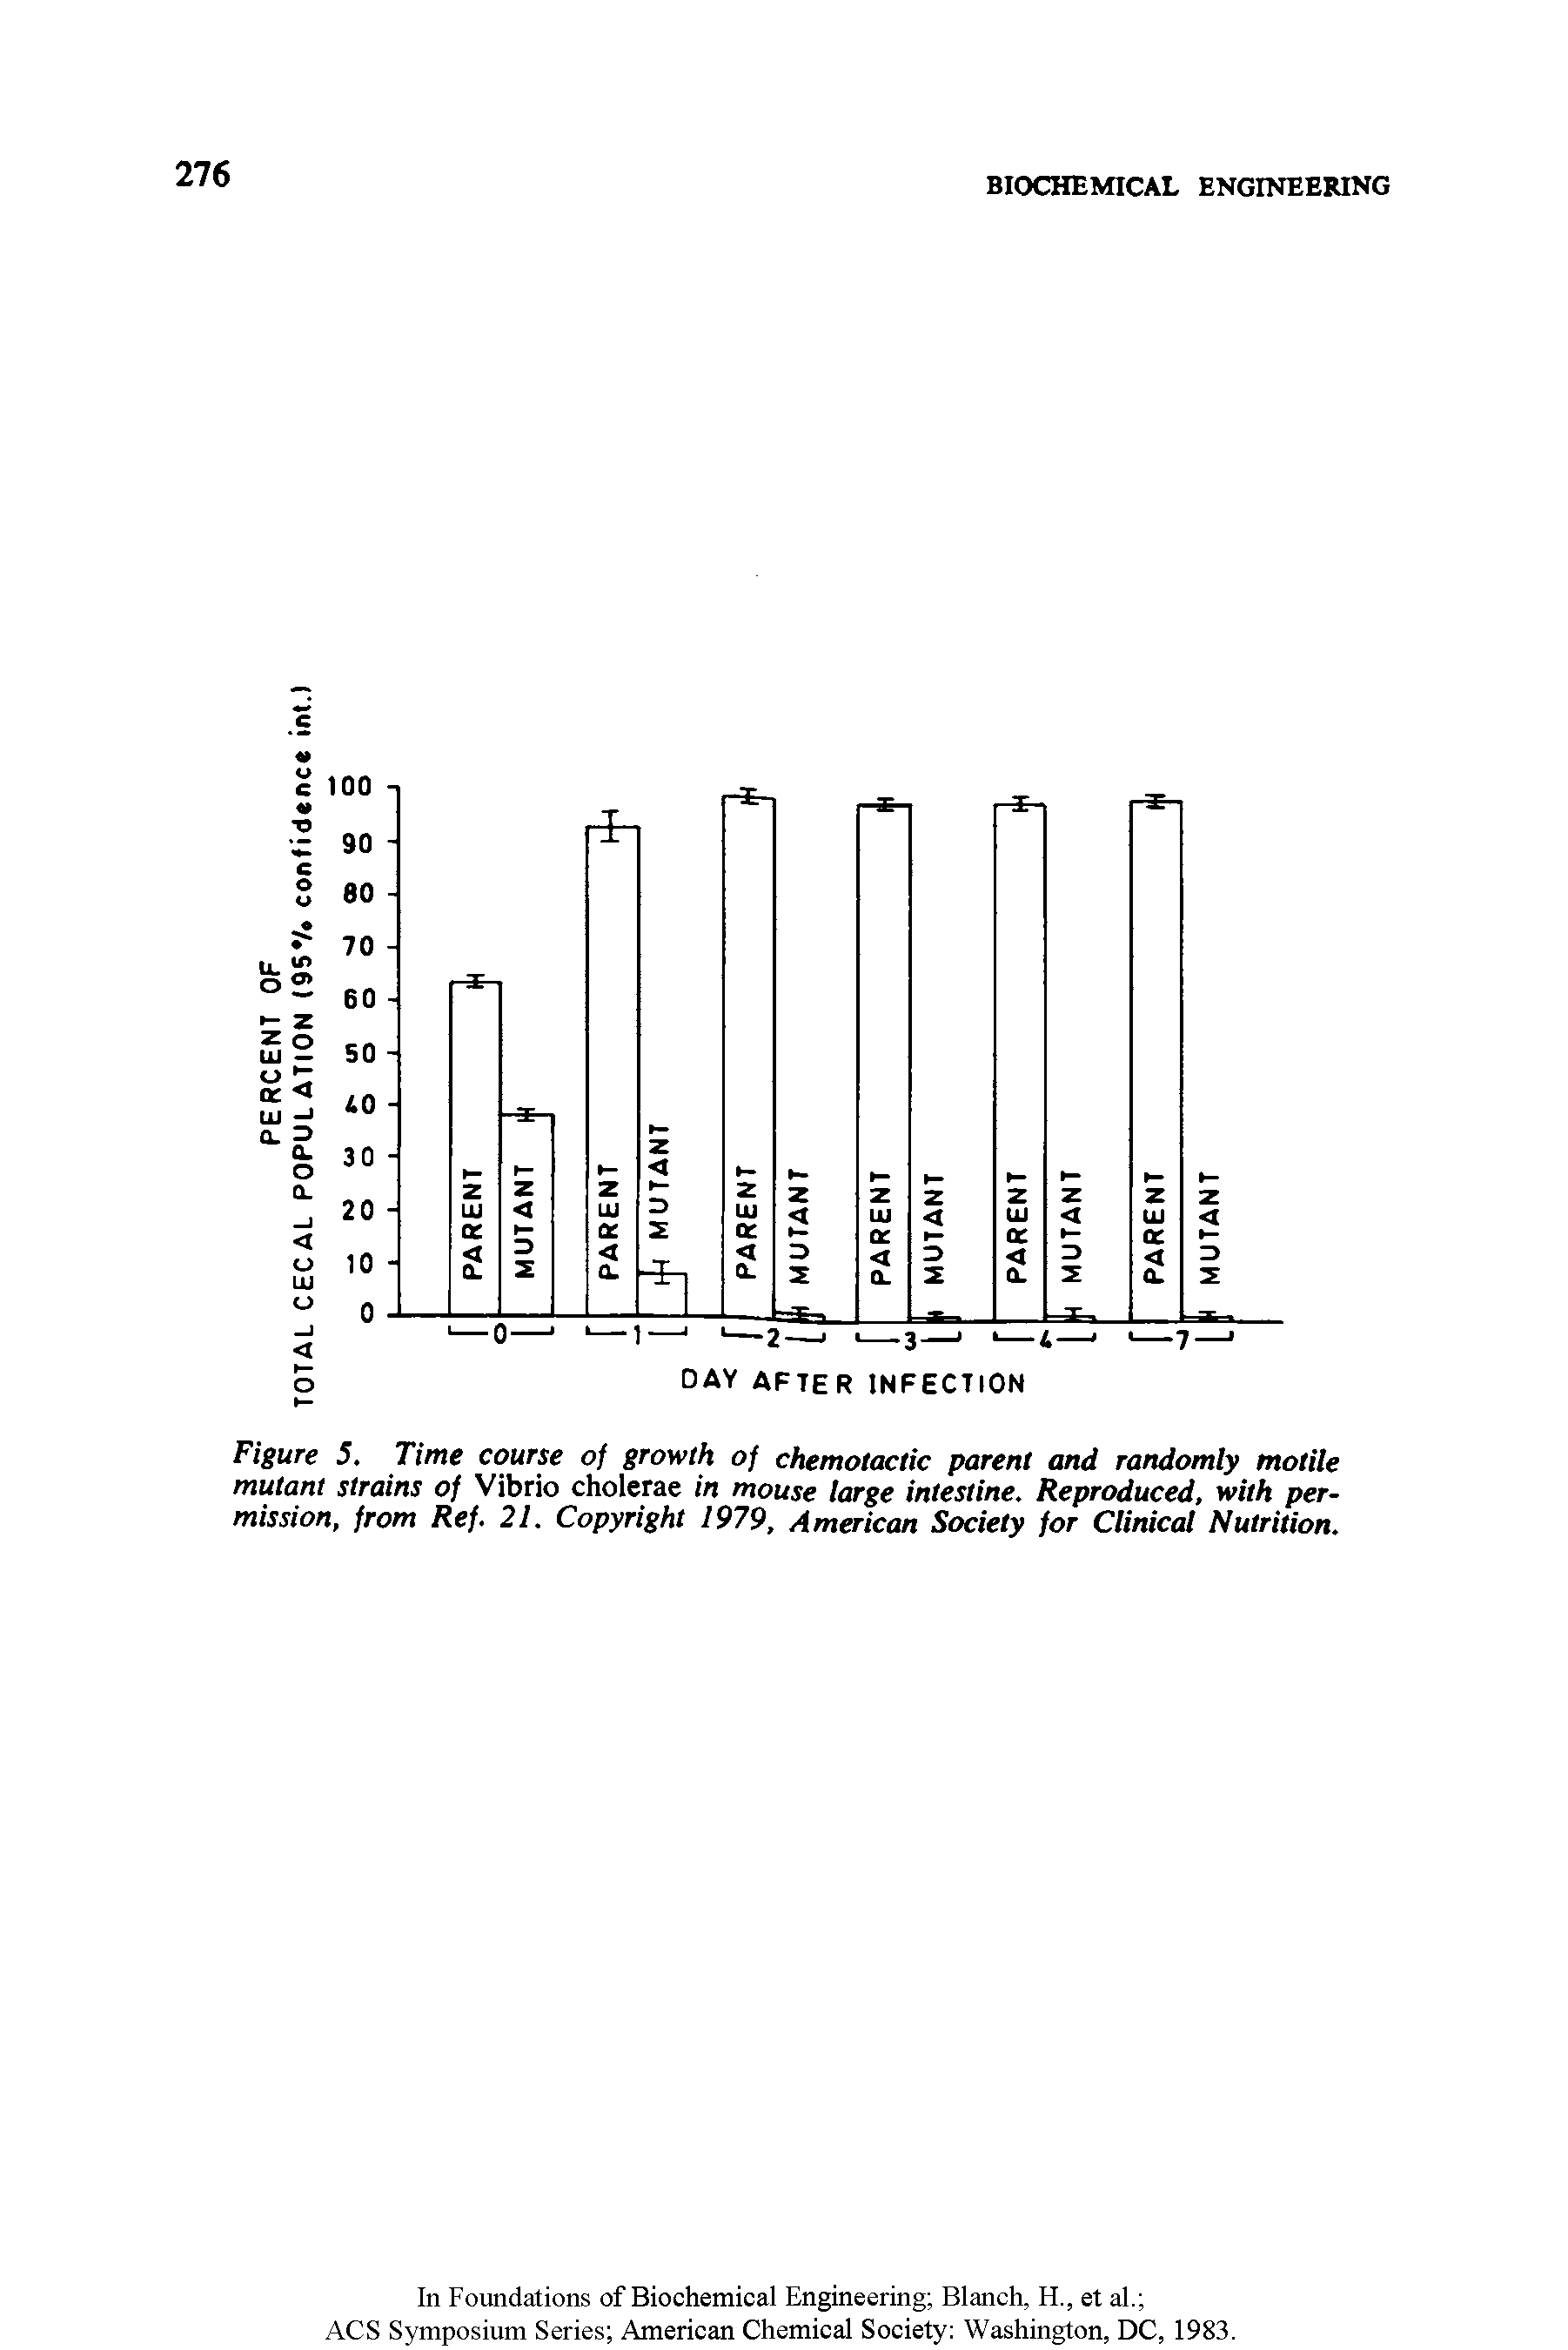 Figure 5. Time course of growth of chemotactic parent and randomly motile mutant strains of Vibrio cholerae in mouse large intestine. Reproduced, with permission, from Ref. 21. Copyright 1979, American Society for Clinical Nutrition.